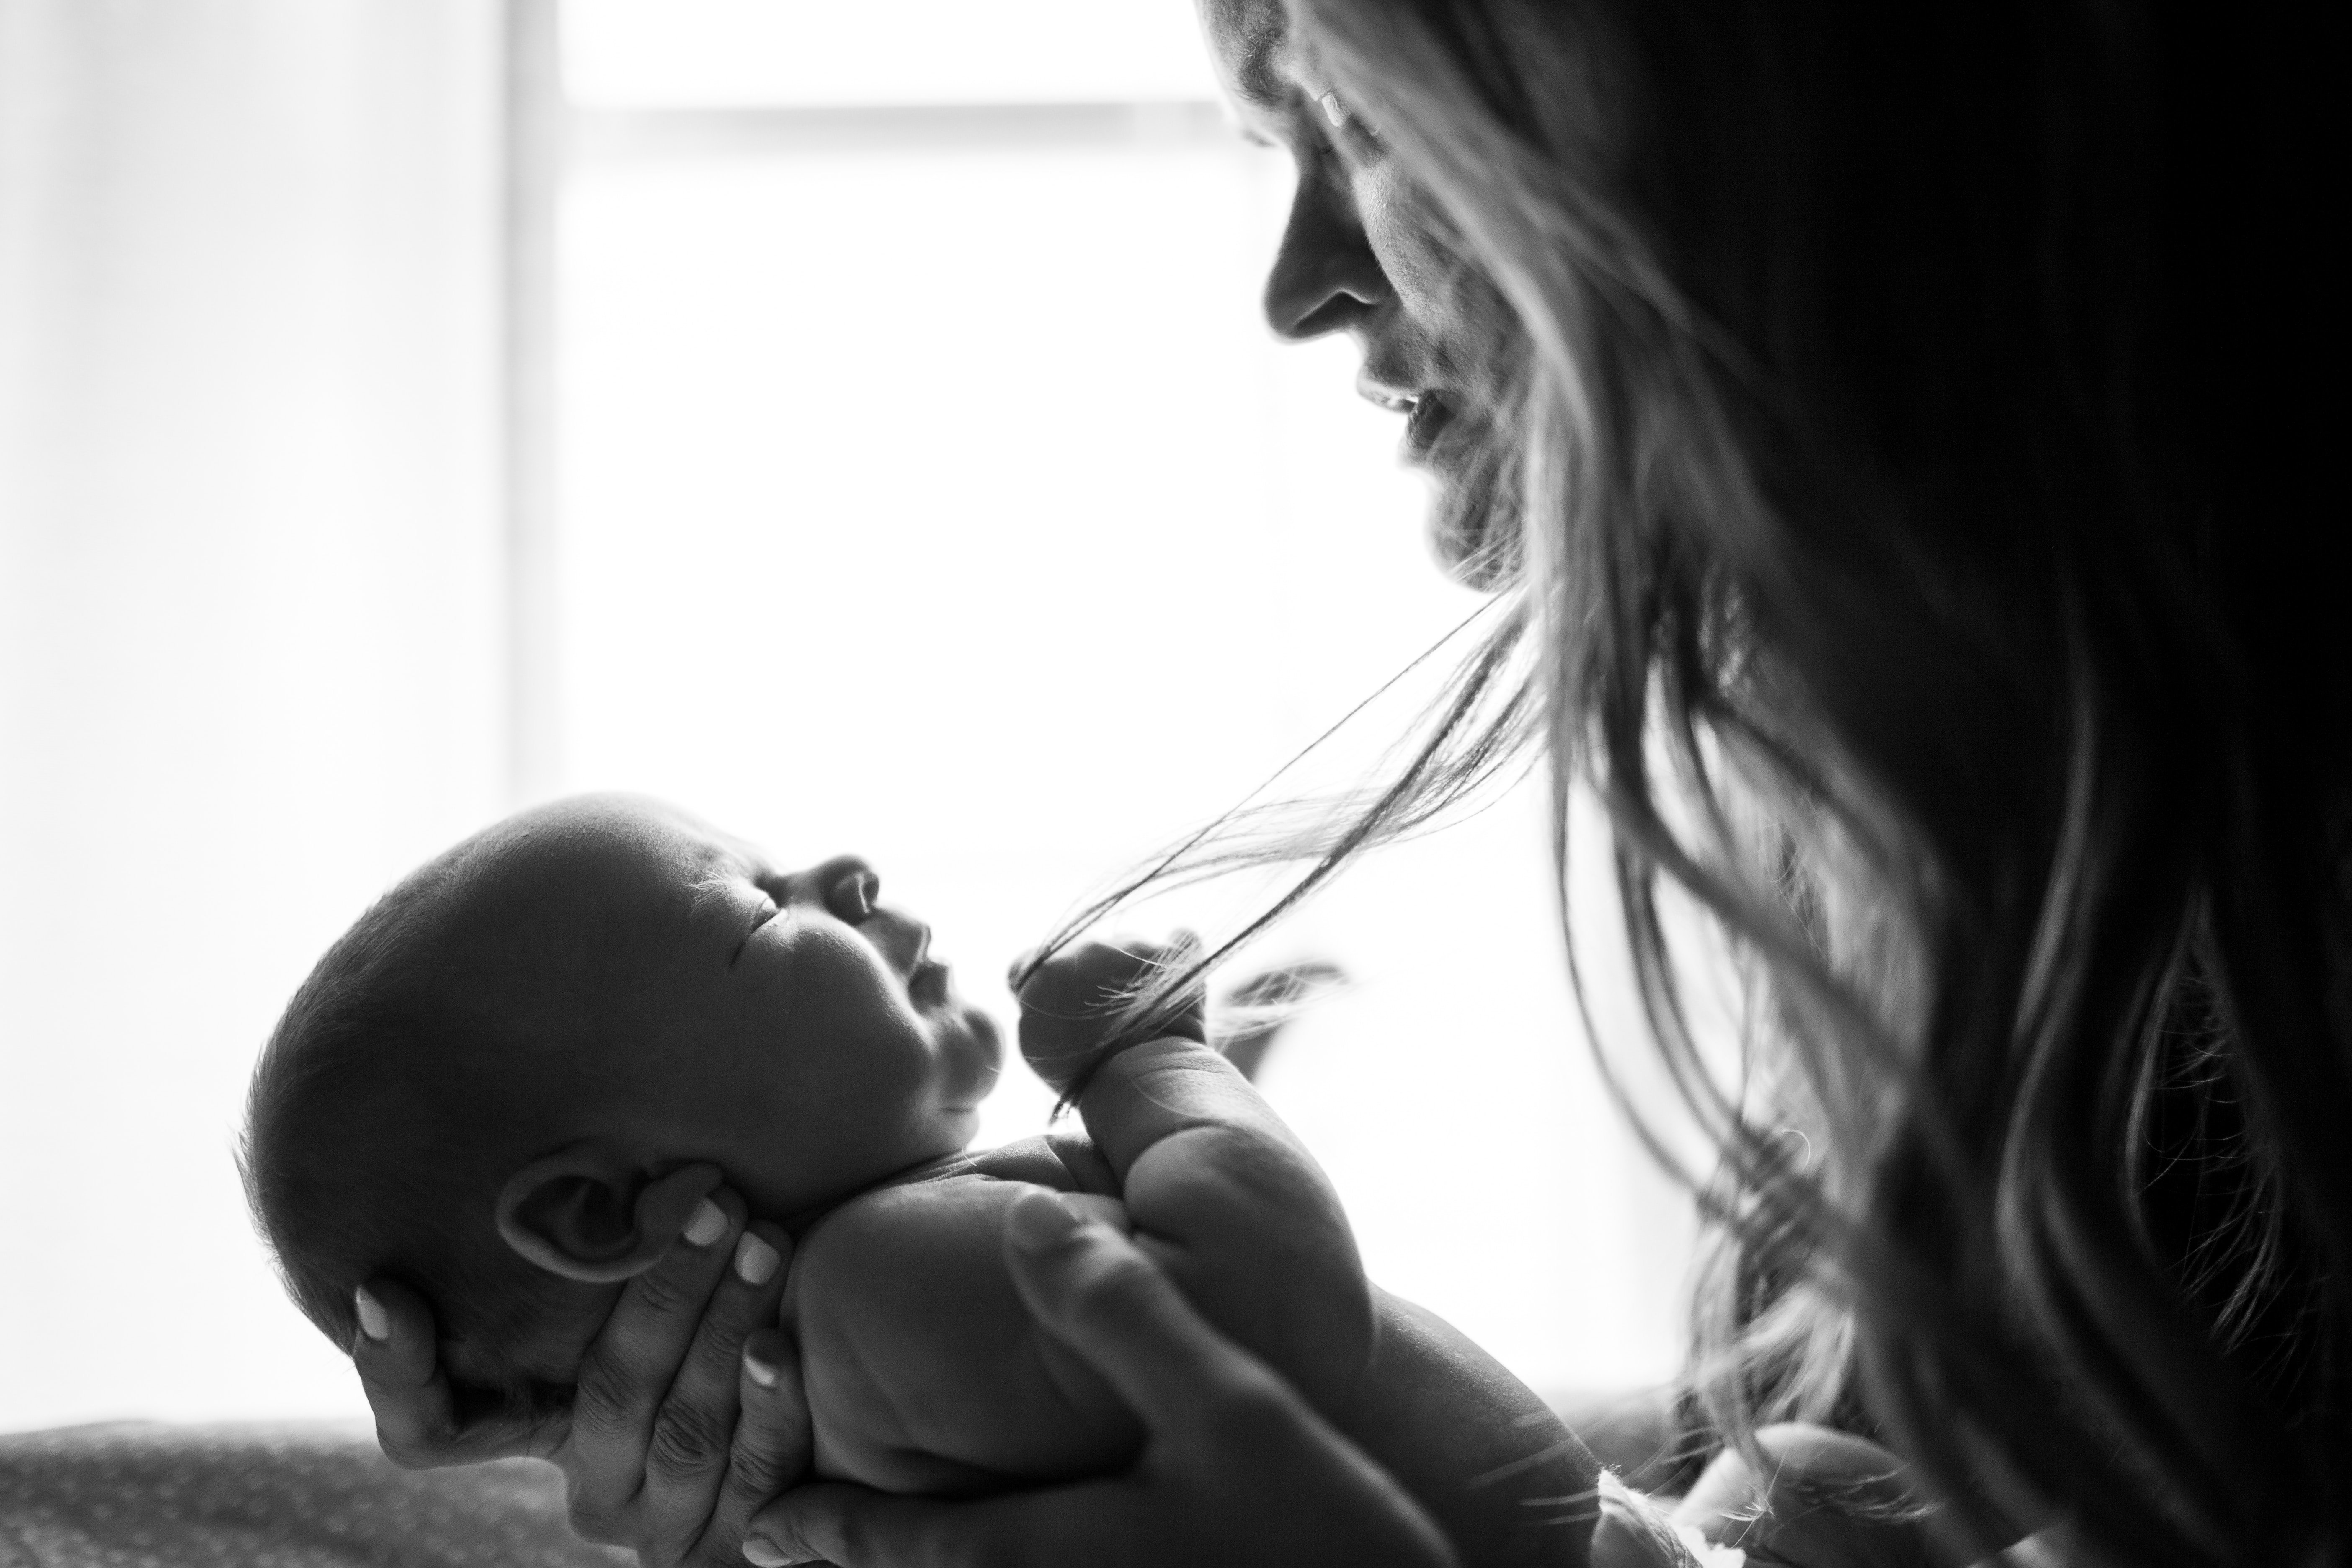 A mother and child | Source: Unsplash.com